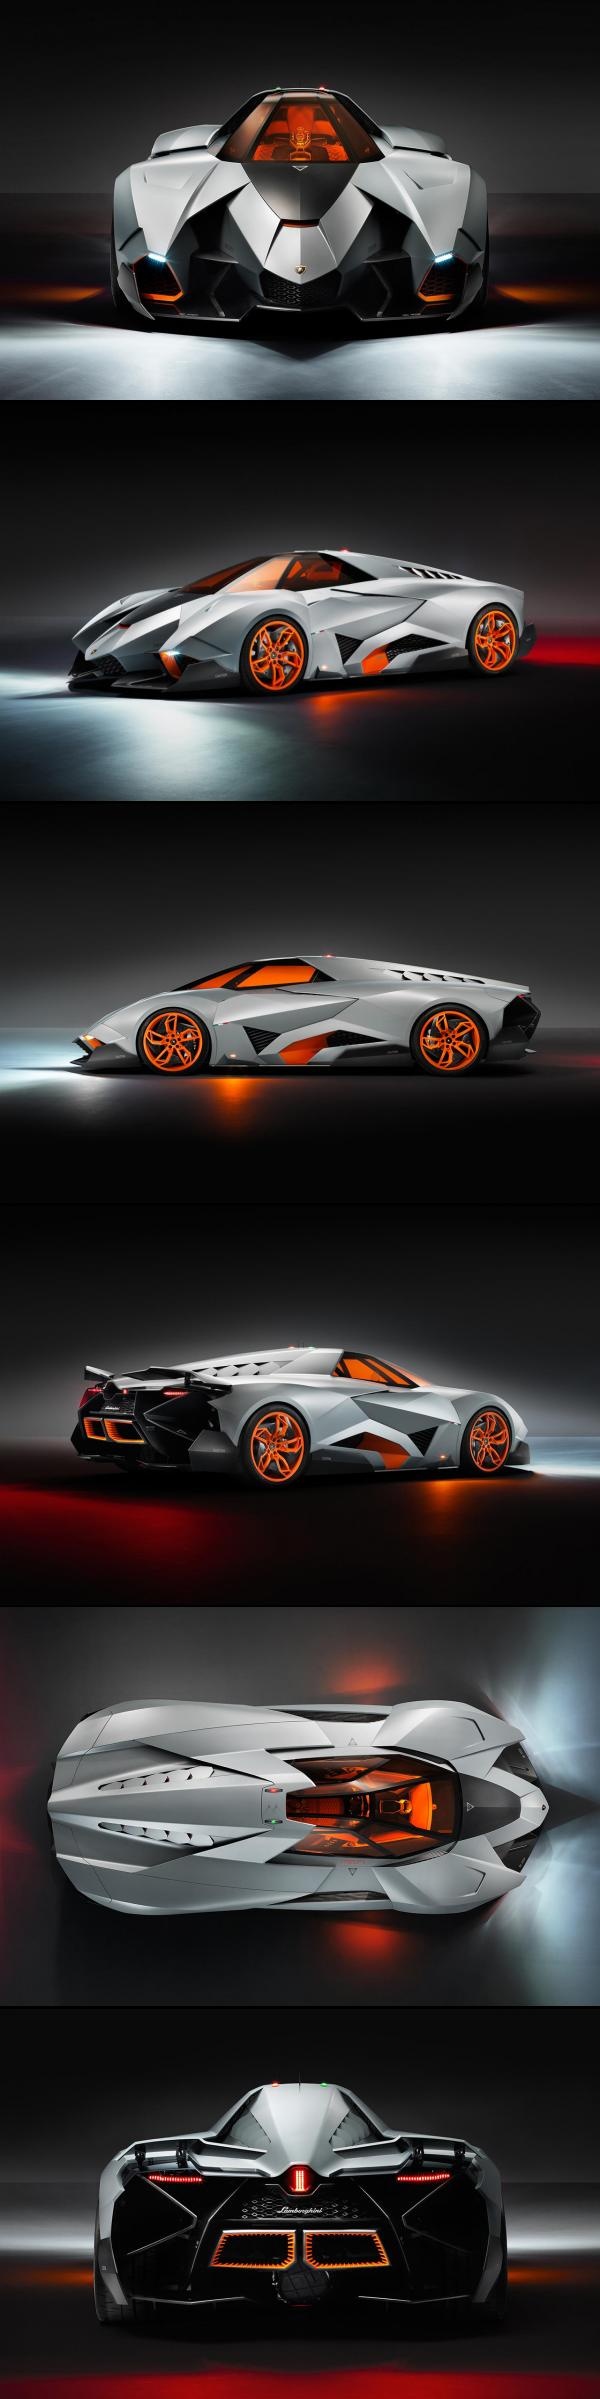 The Lamborghini Egoista a?? The Maddest Bull Ever. Hit the pic to find out why!